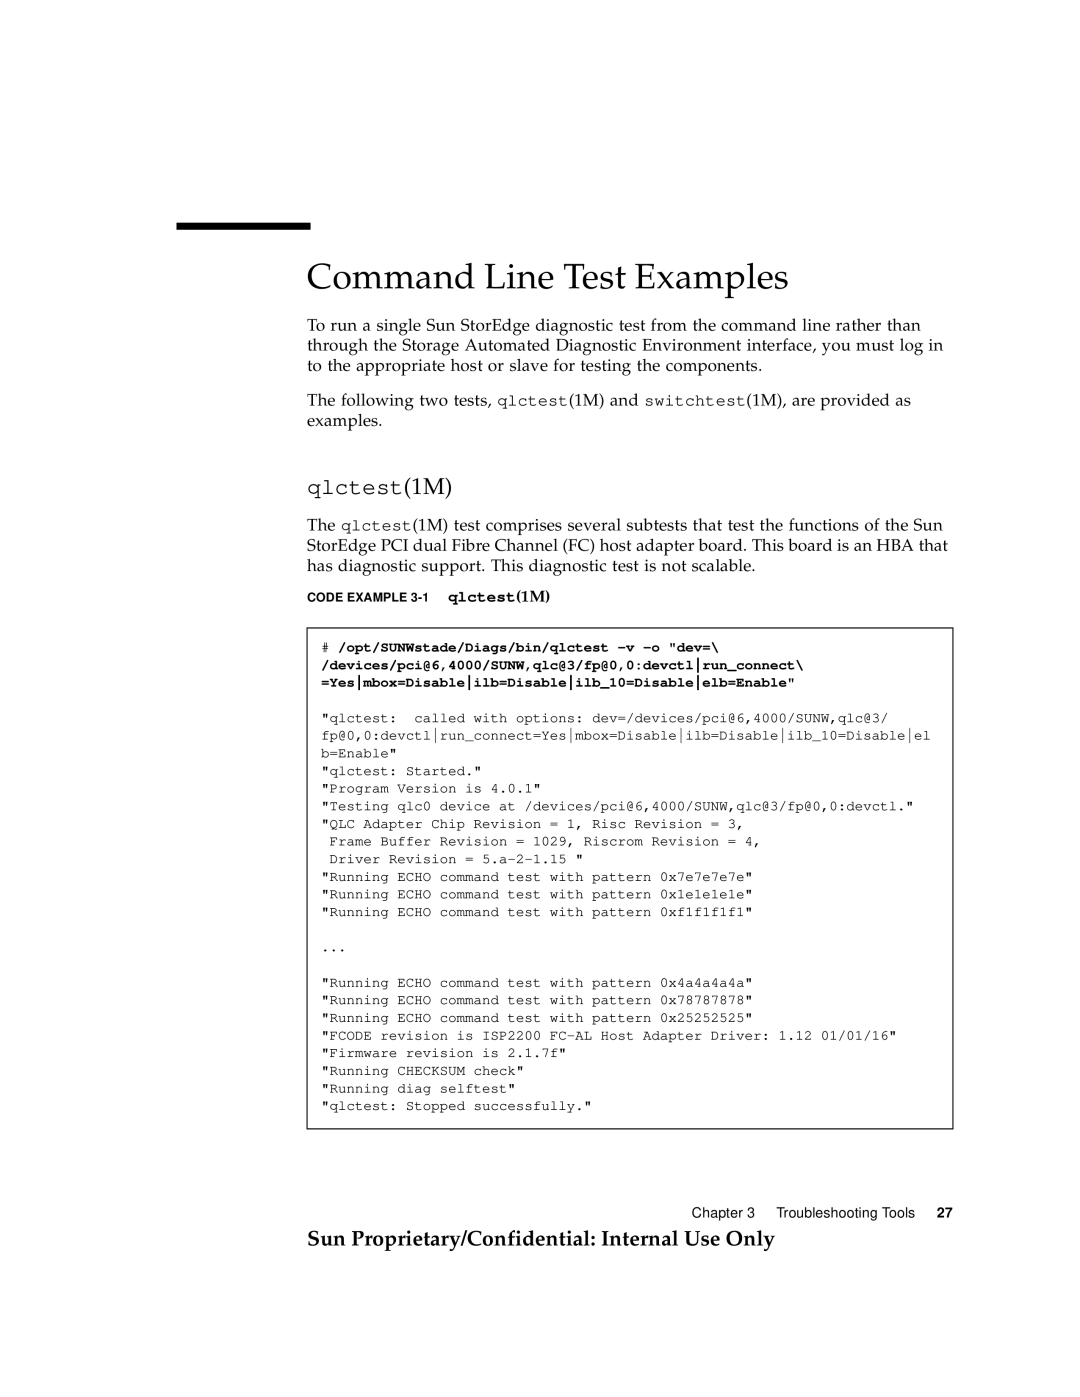 Sun Microsystems 6900, 3900 manual Command Line Test Examples, qlctest1M, Sun Proprietary/Confidential Internal Use Only 